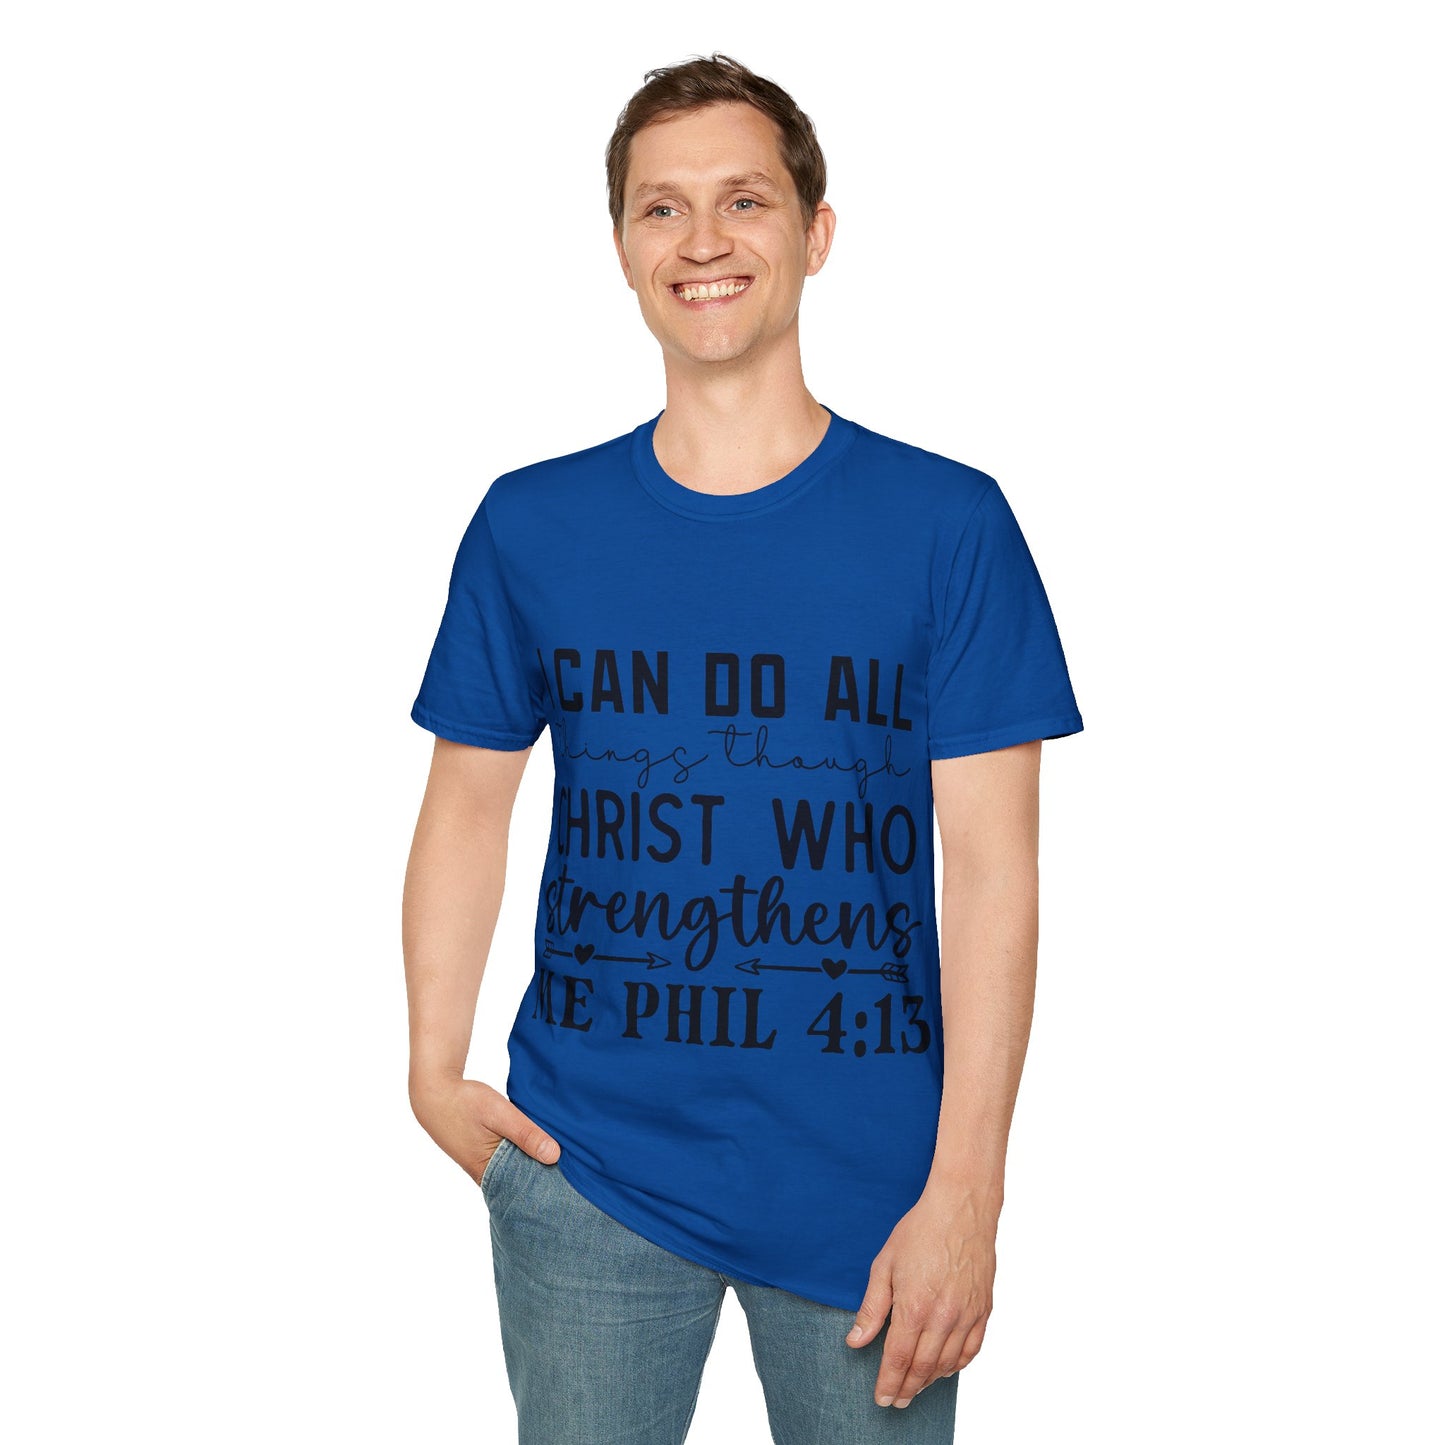 I Can Do All Things Though Christ Who Strengthens Me Phil 4:13 Triple Viking T-Shirt